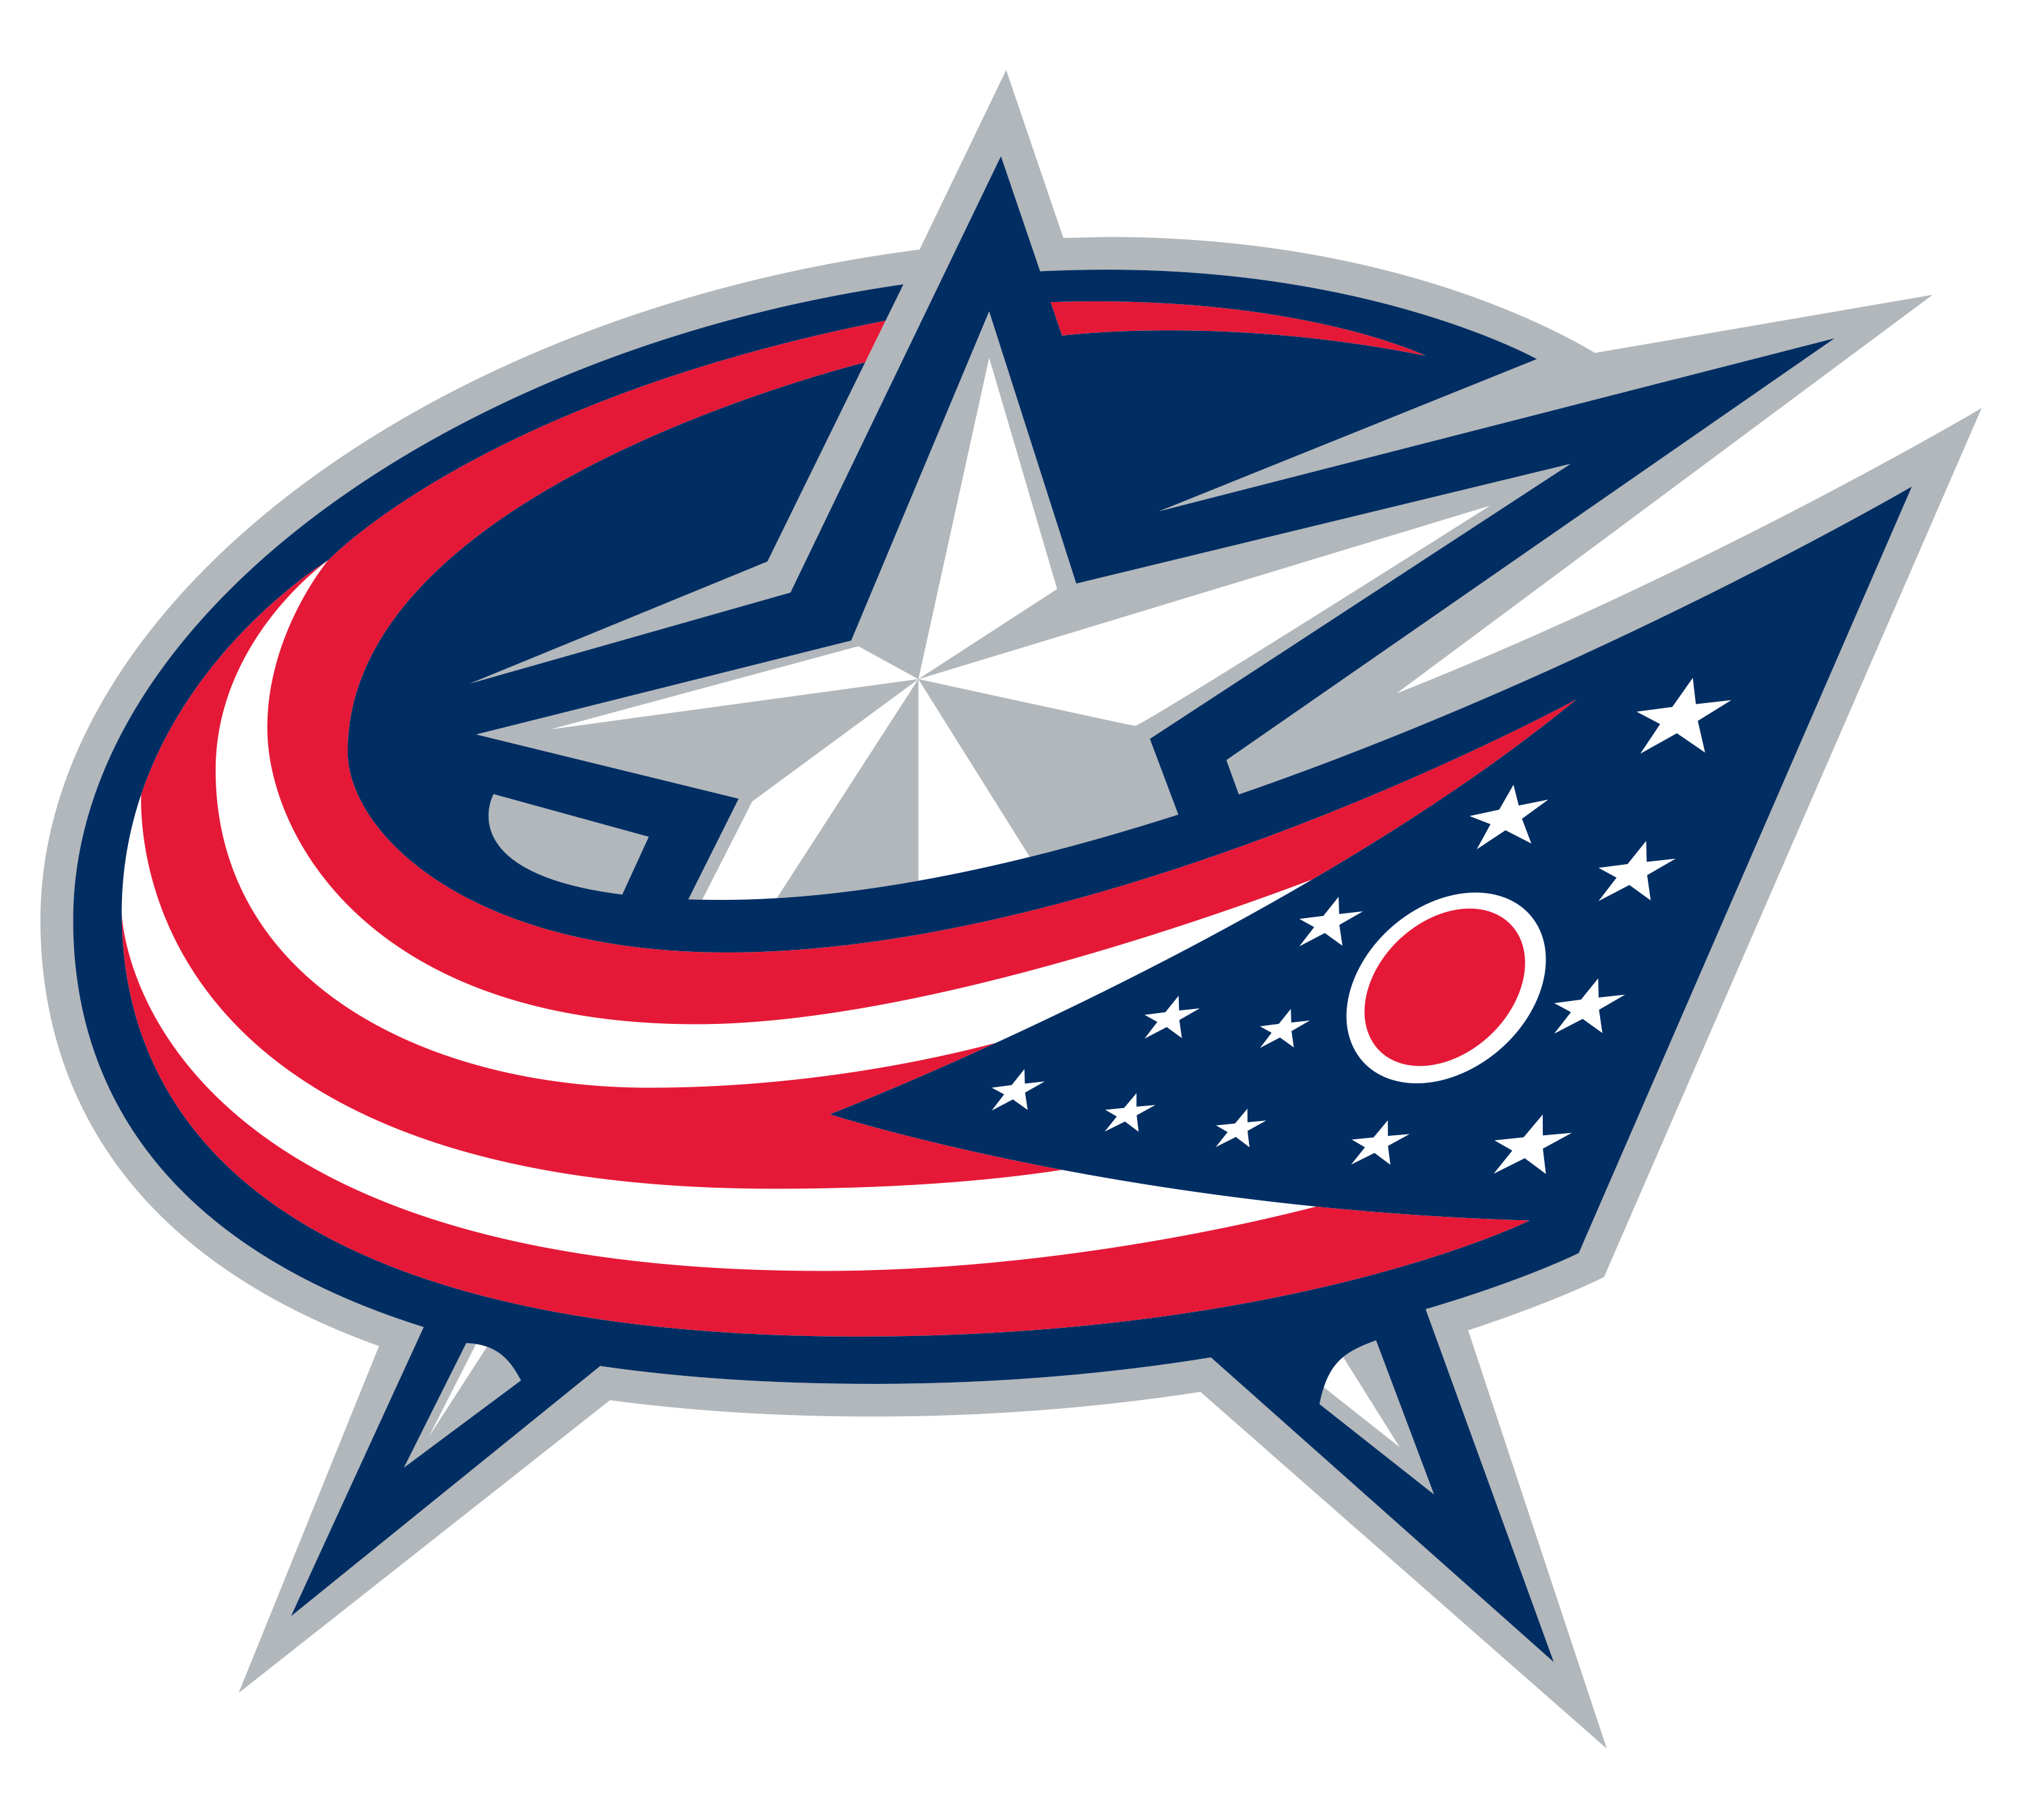 Join the Blue Jackets home game excitement: Parking & traffic info